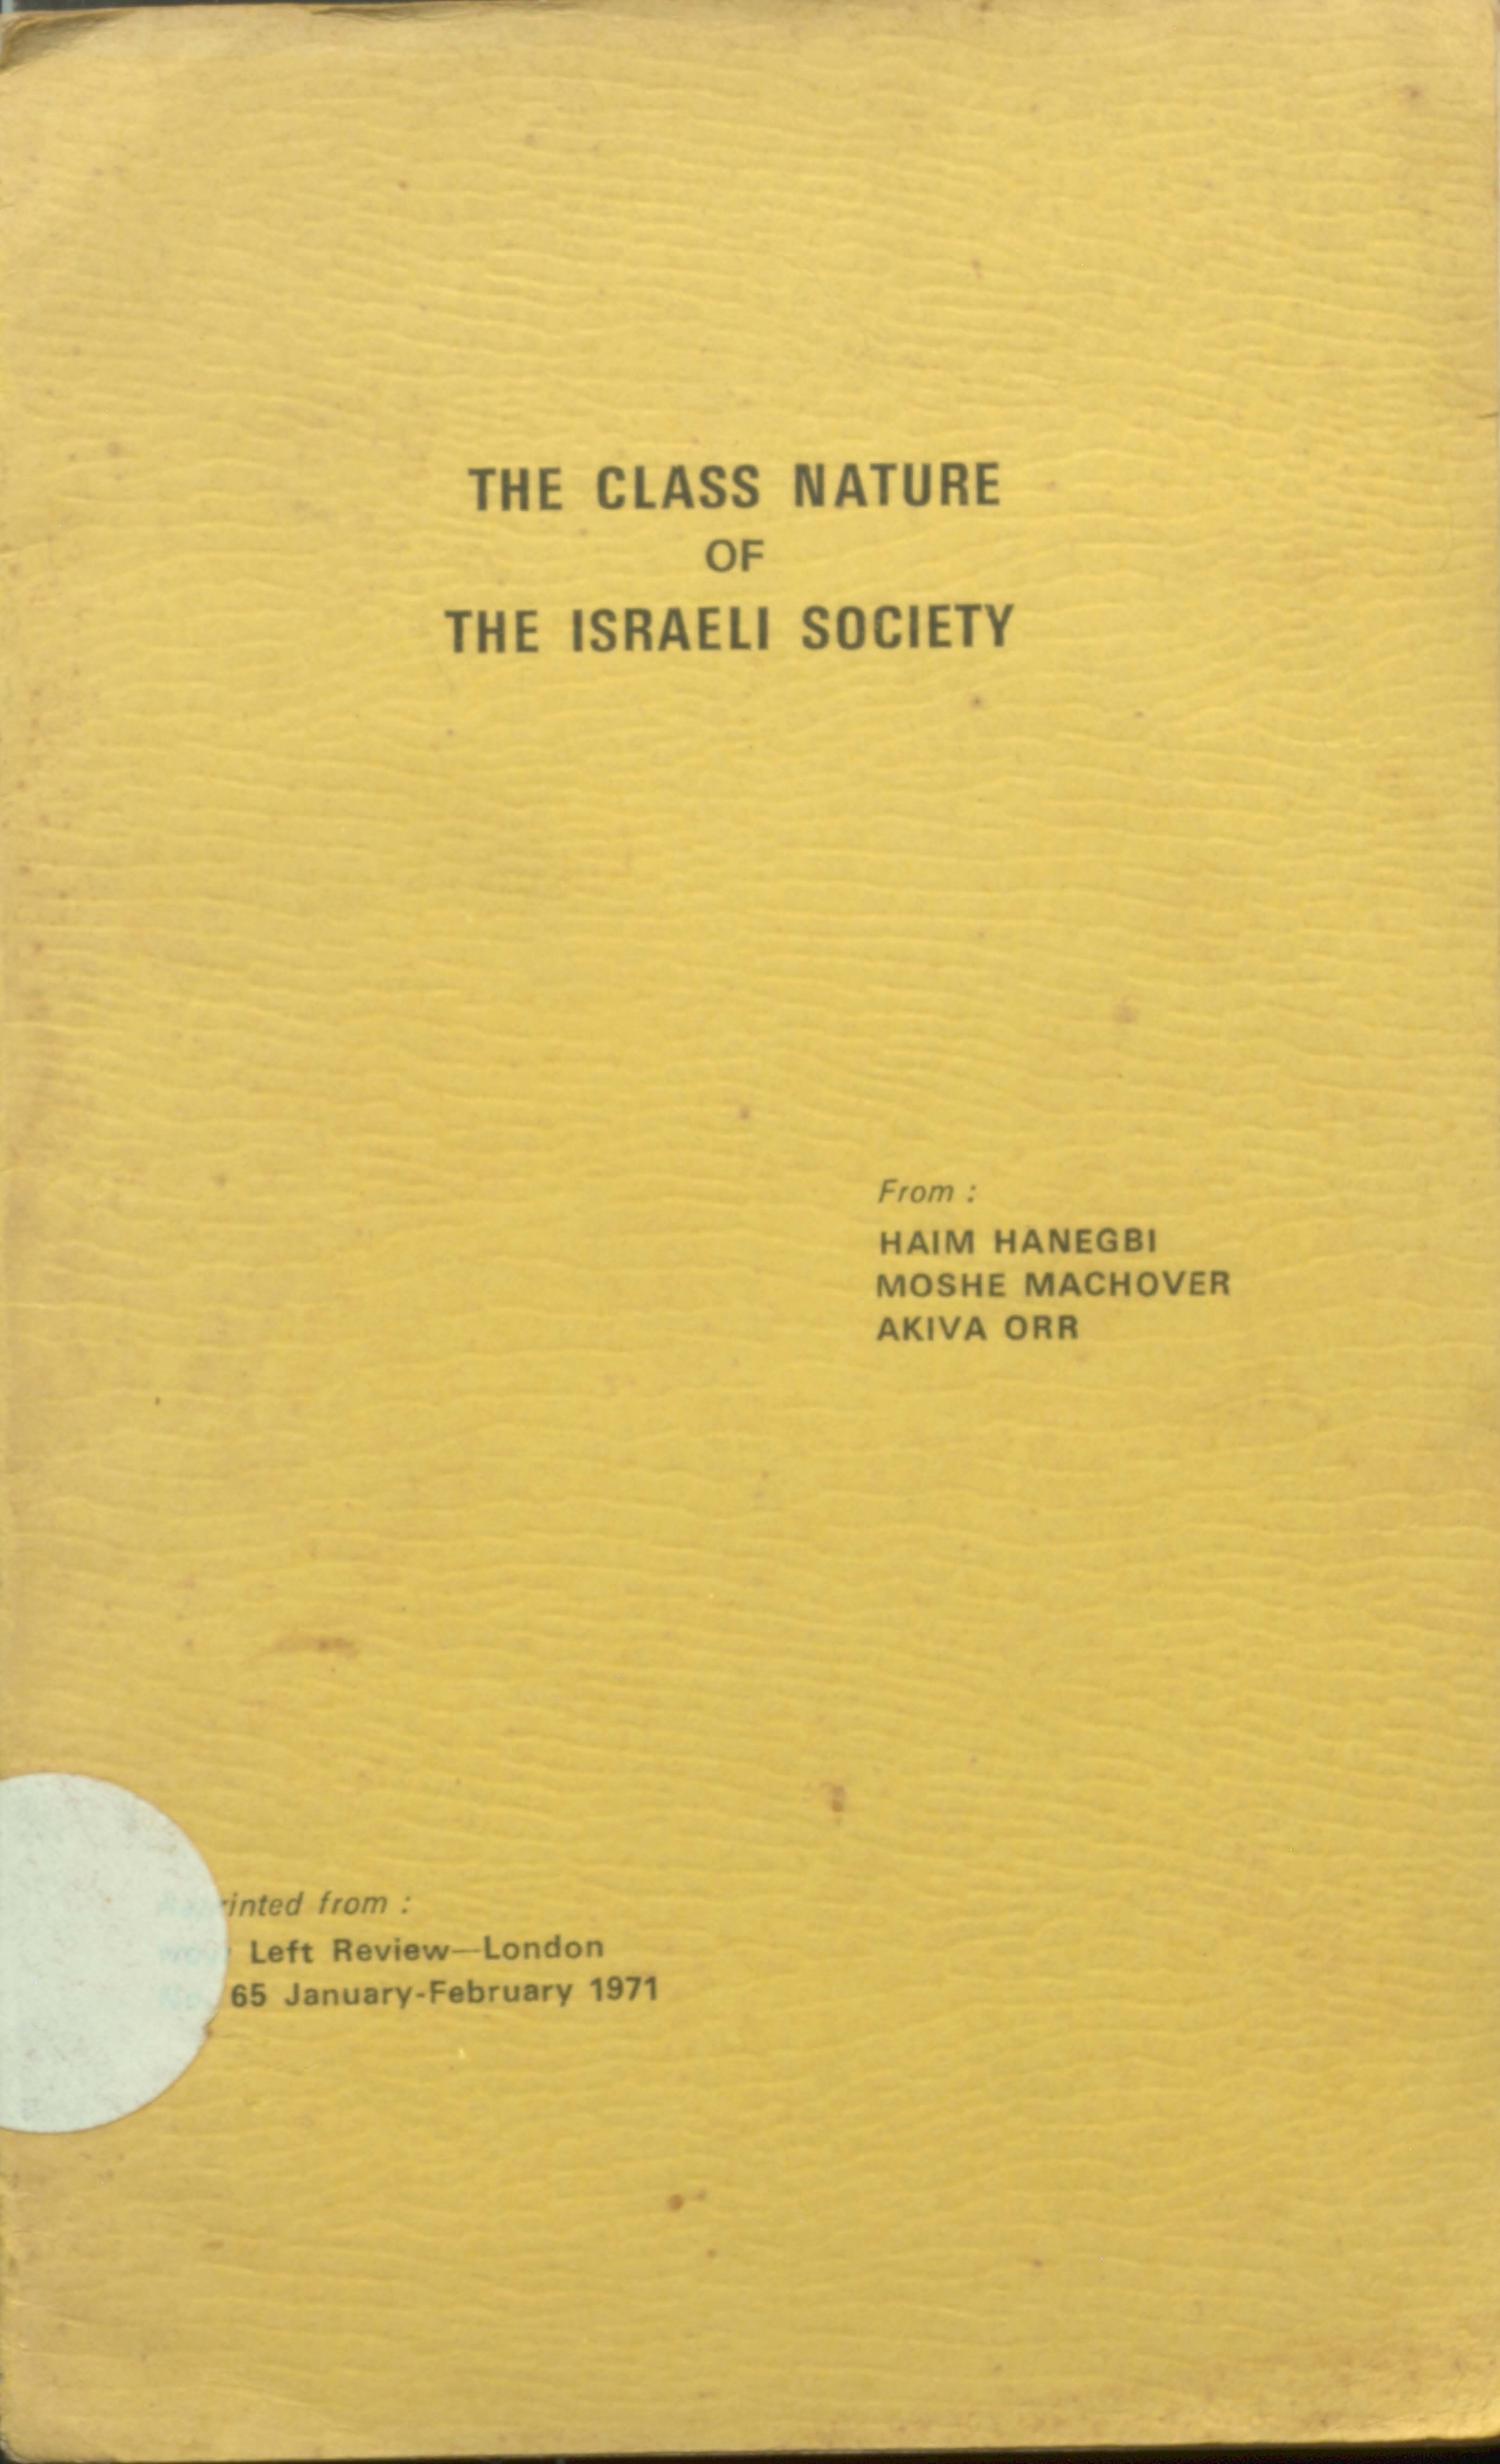 The class nature of the israeli society